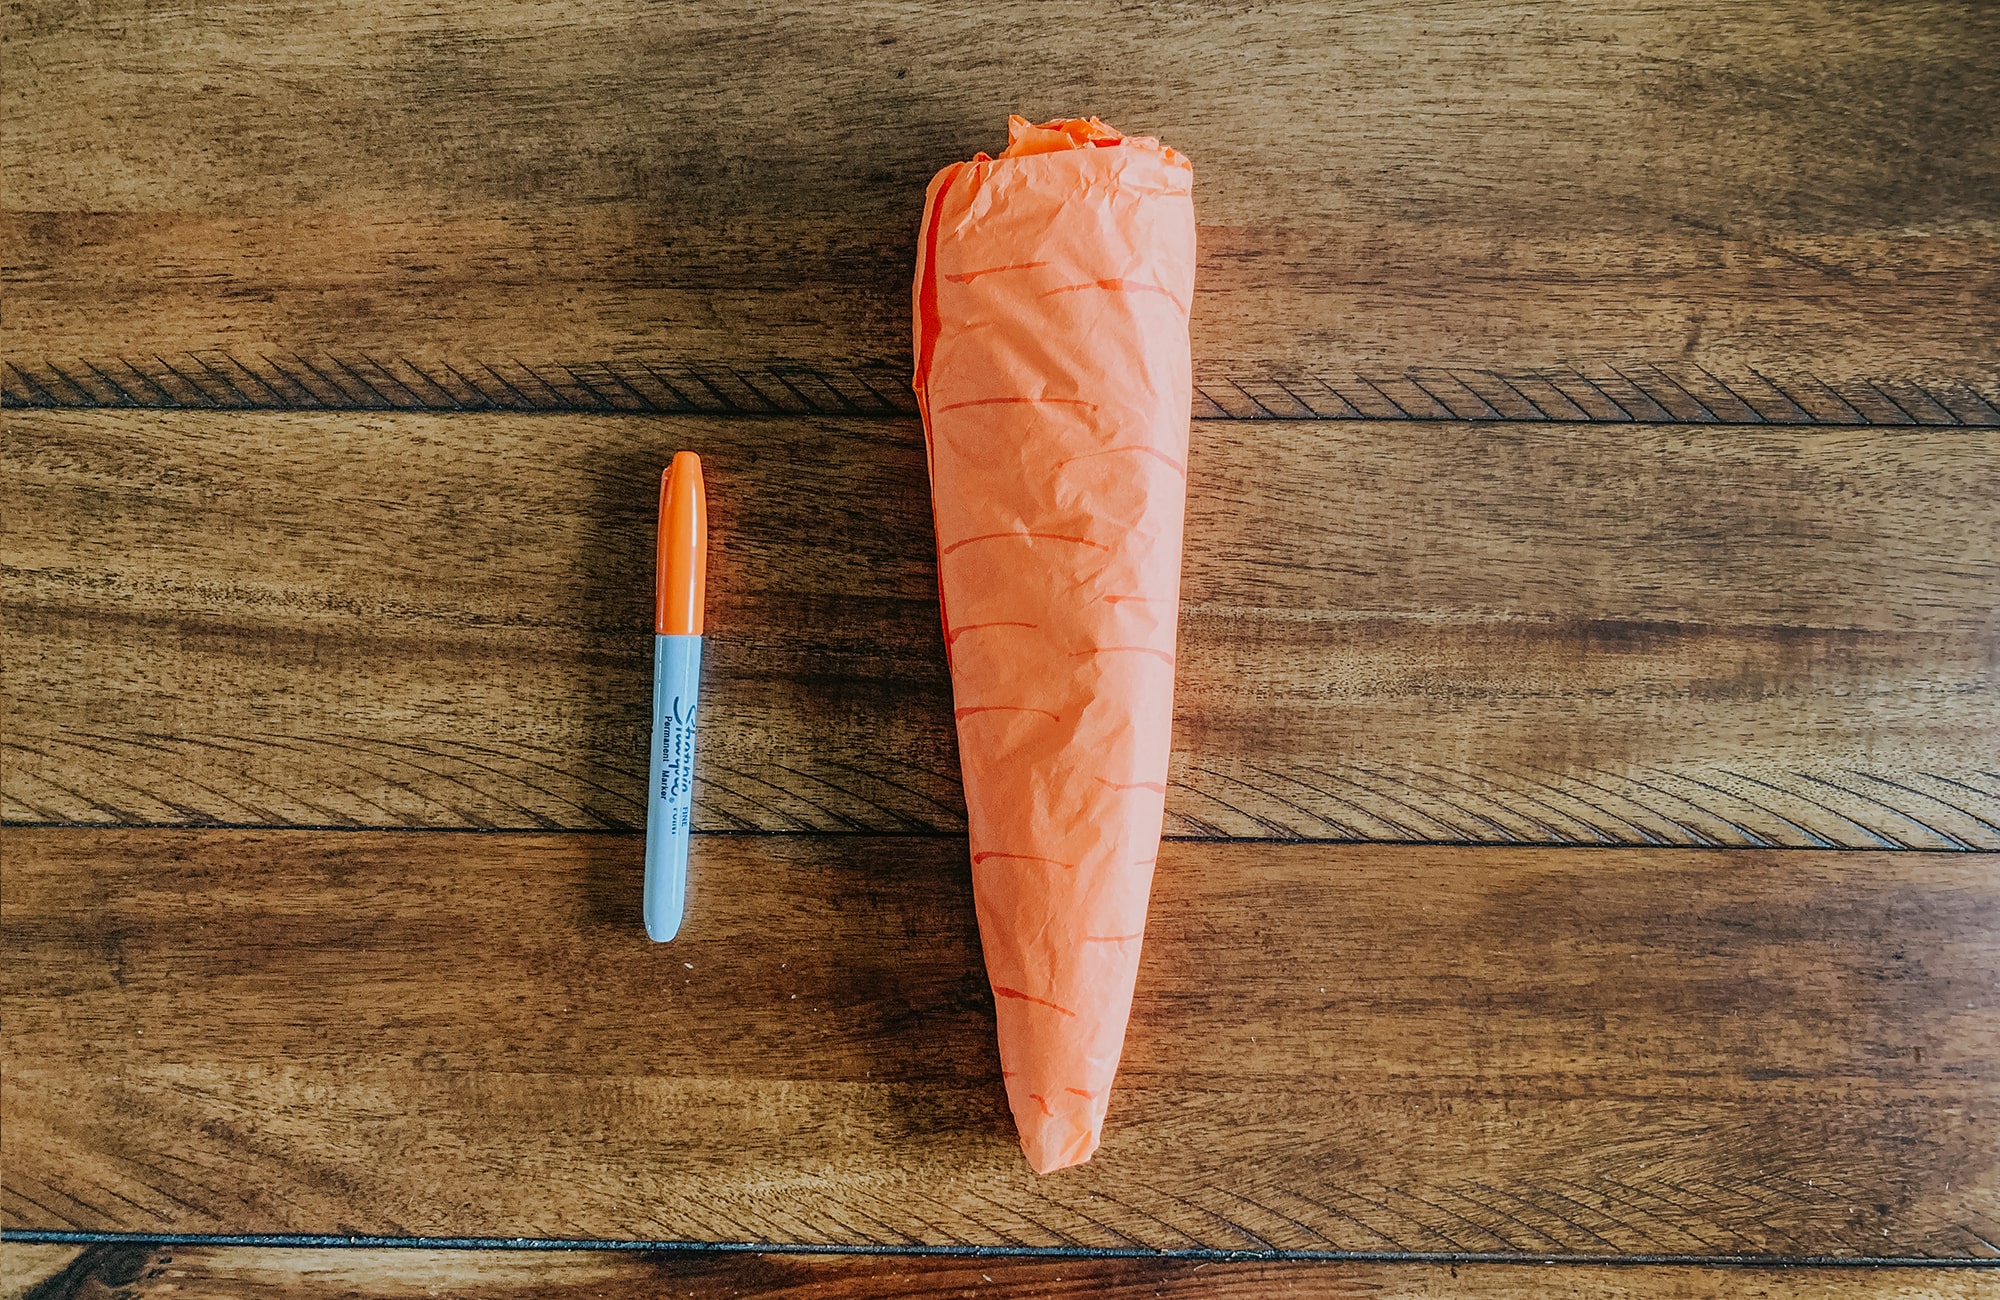 Draw lines on Tissue Paper Carrot